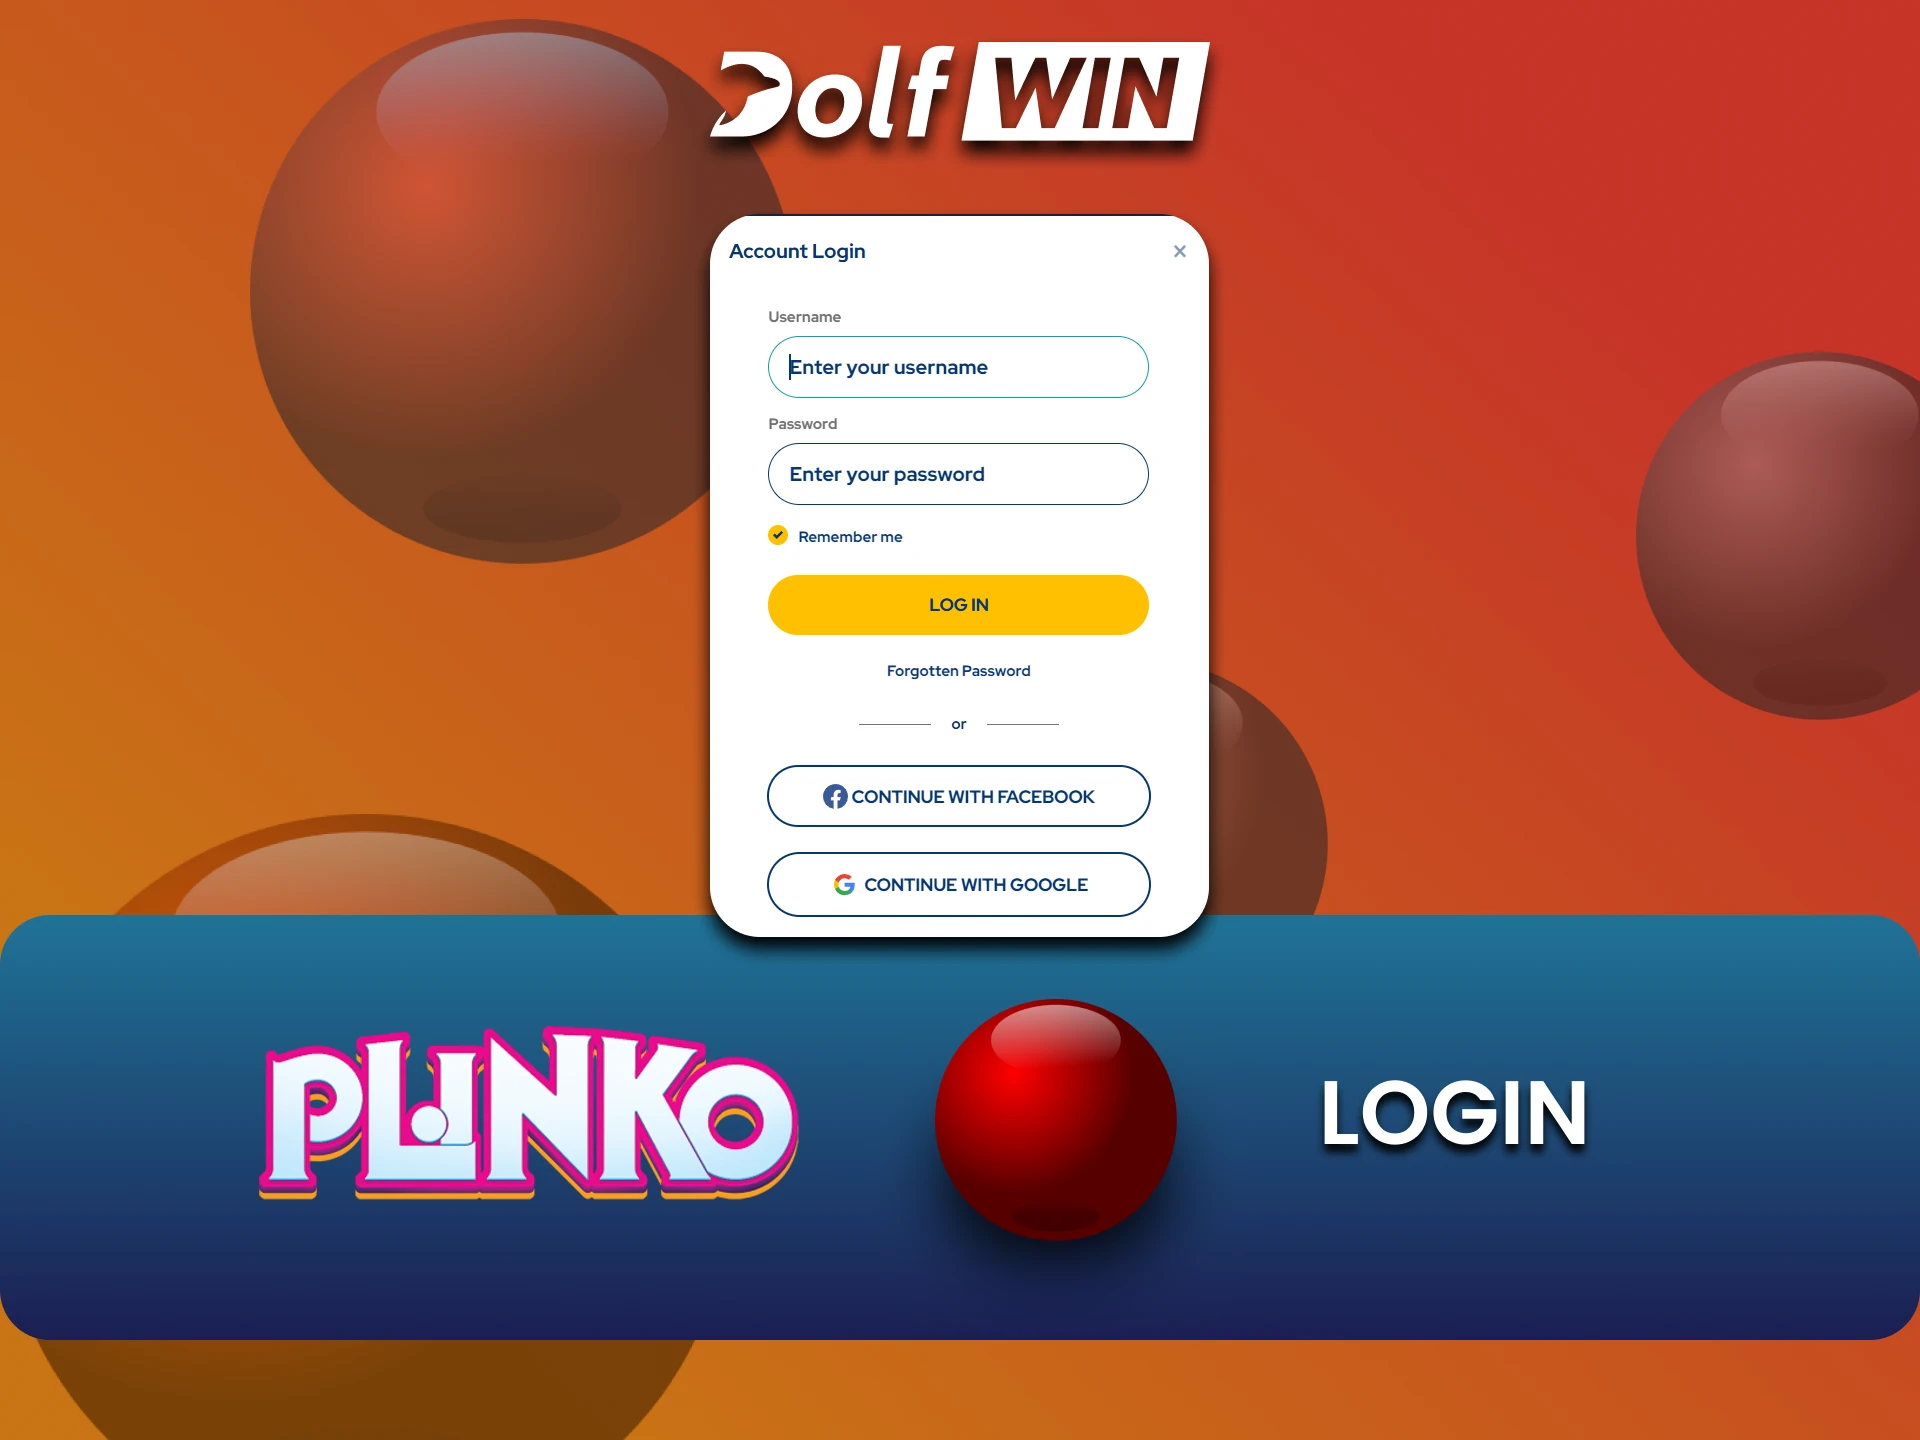 Log in to your existing Dolfwin account to play Plinko.